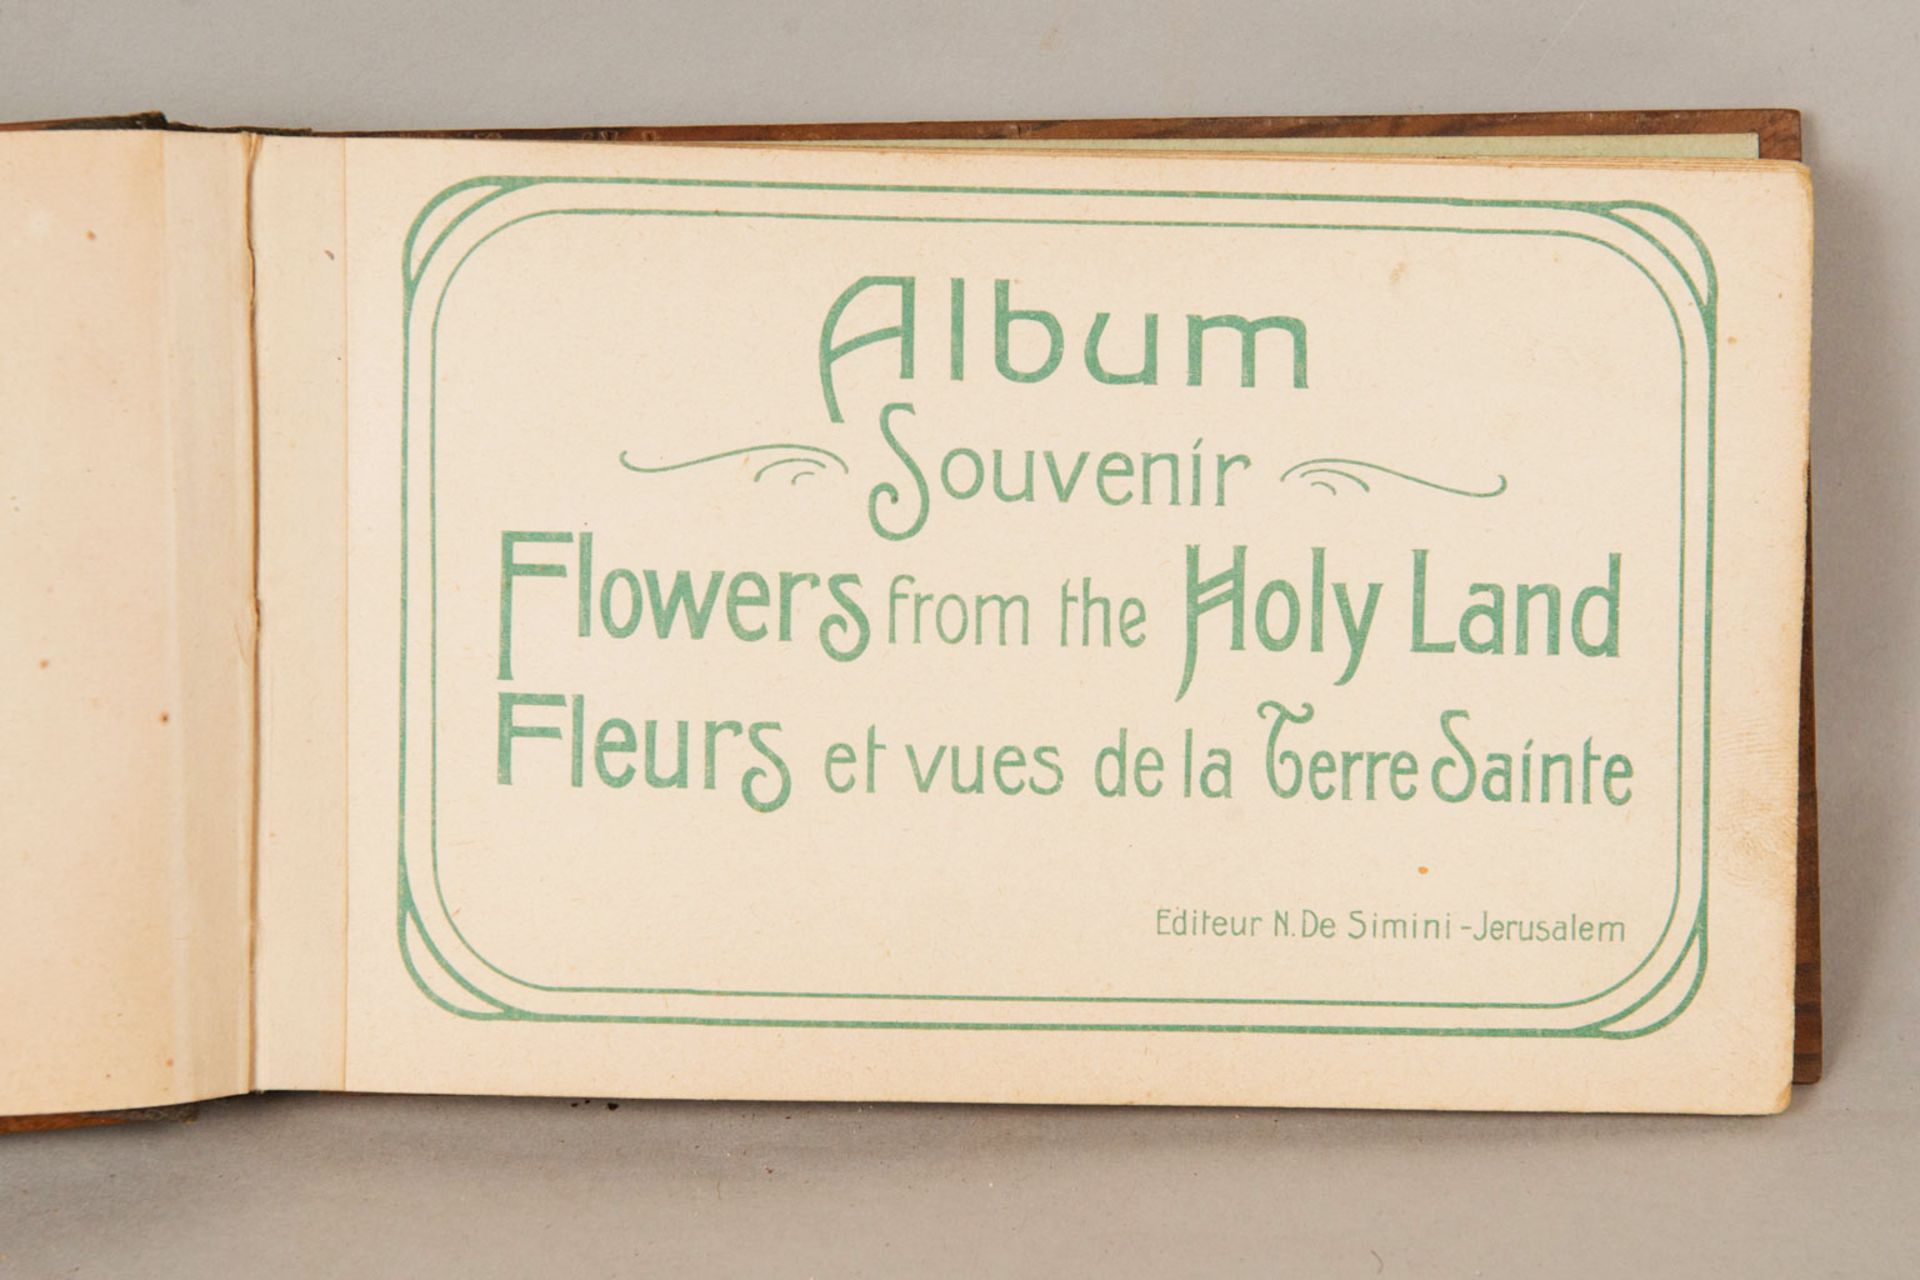 Album Souvenir Flowers from the Holy Land - Image 2 of 3